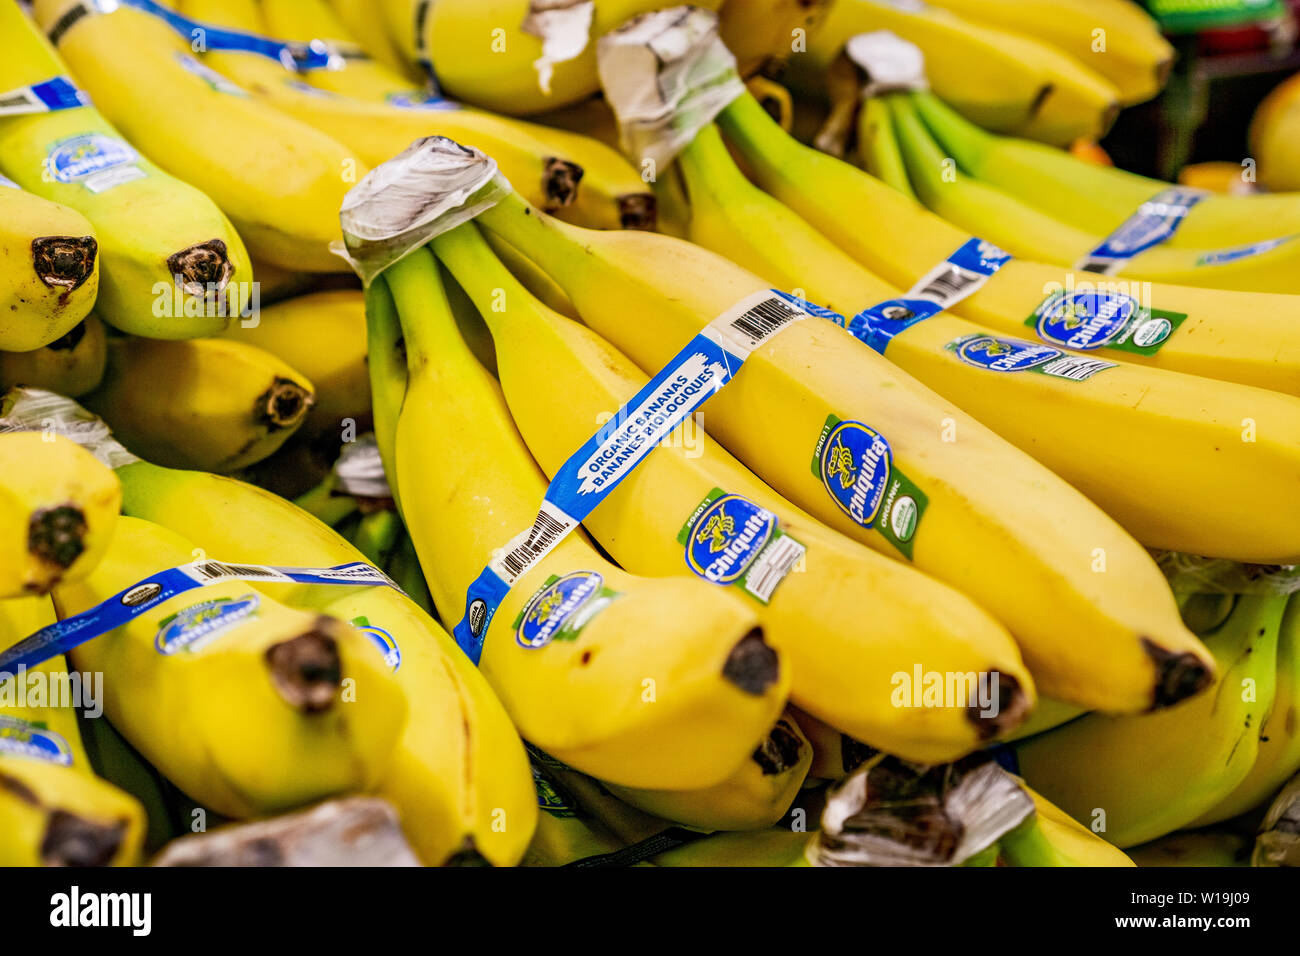 June 25, 2019 Sunnyvale / CA / USA - Chiquita Organic bananas for purchase in a supermarket Stock Photo